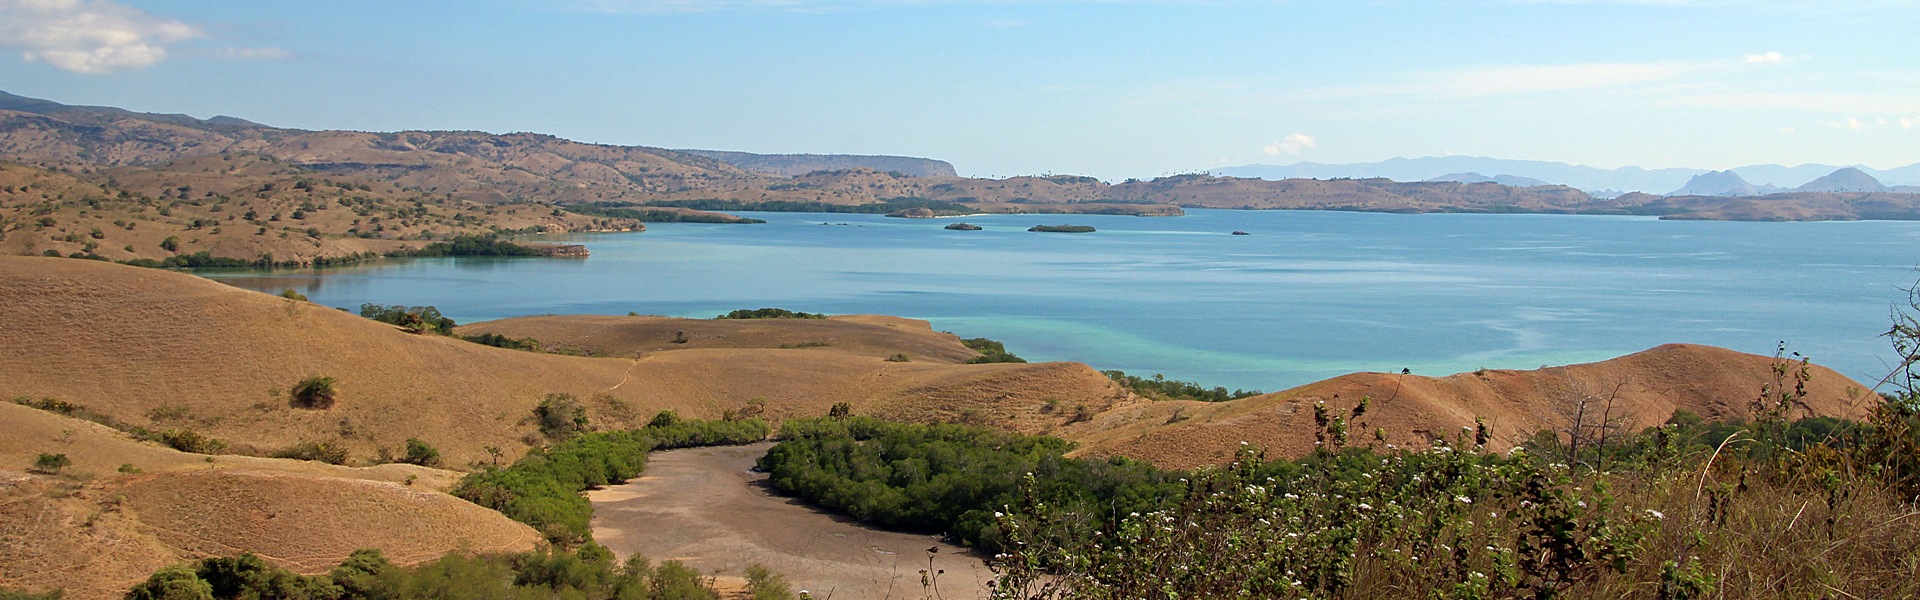 Komodo National Park and beyond, as seen from Rinca Island